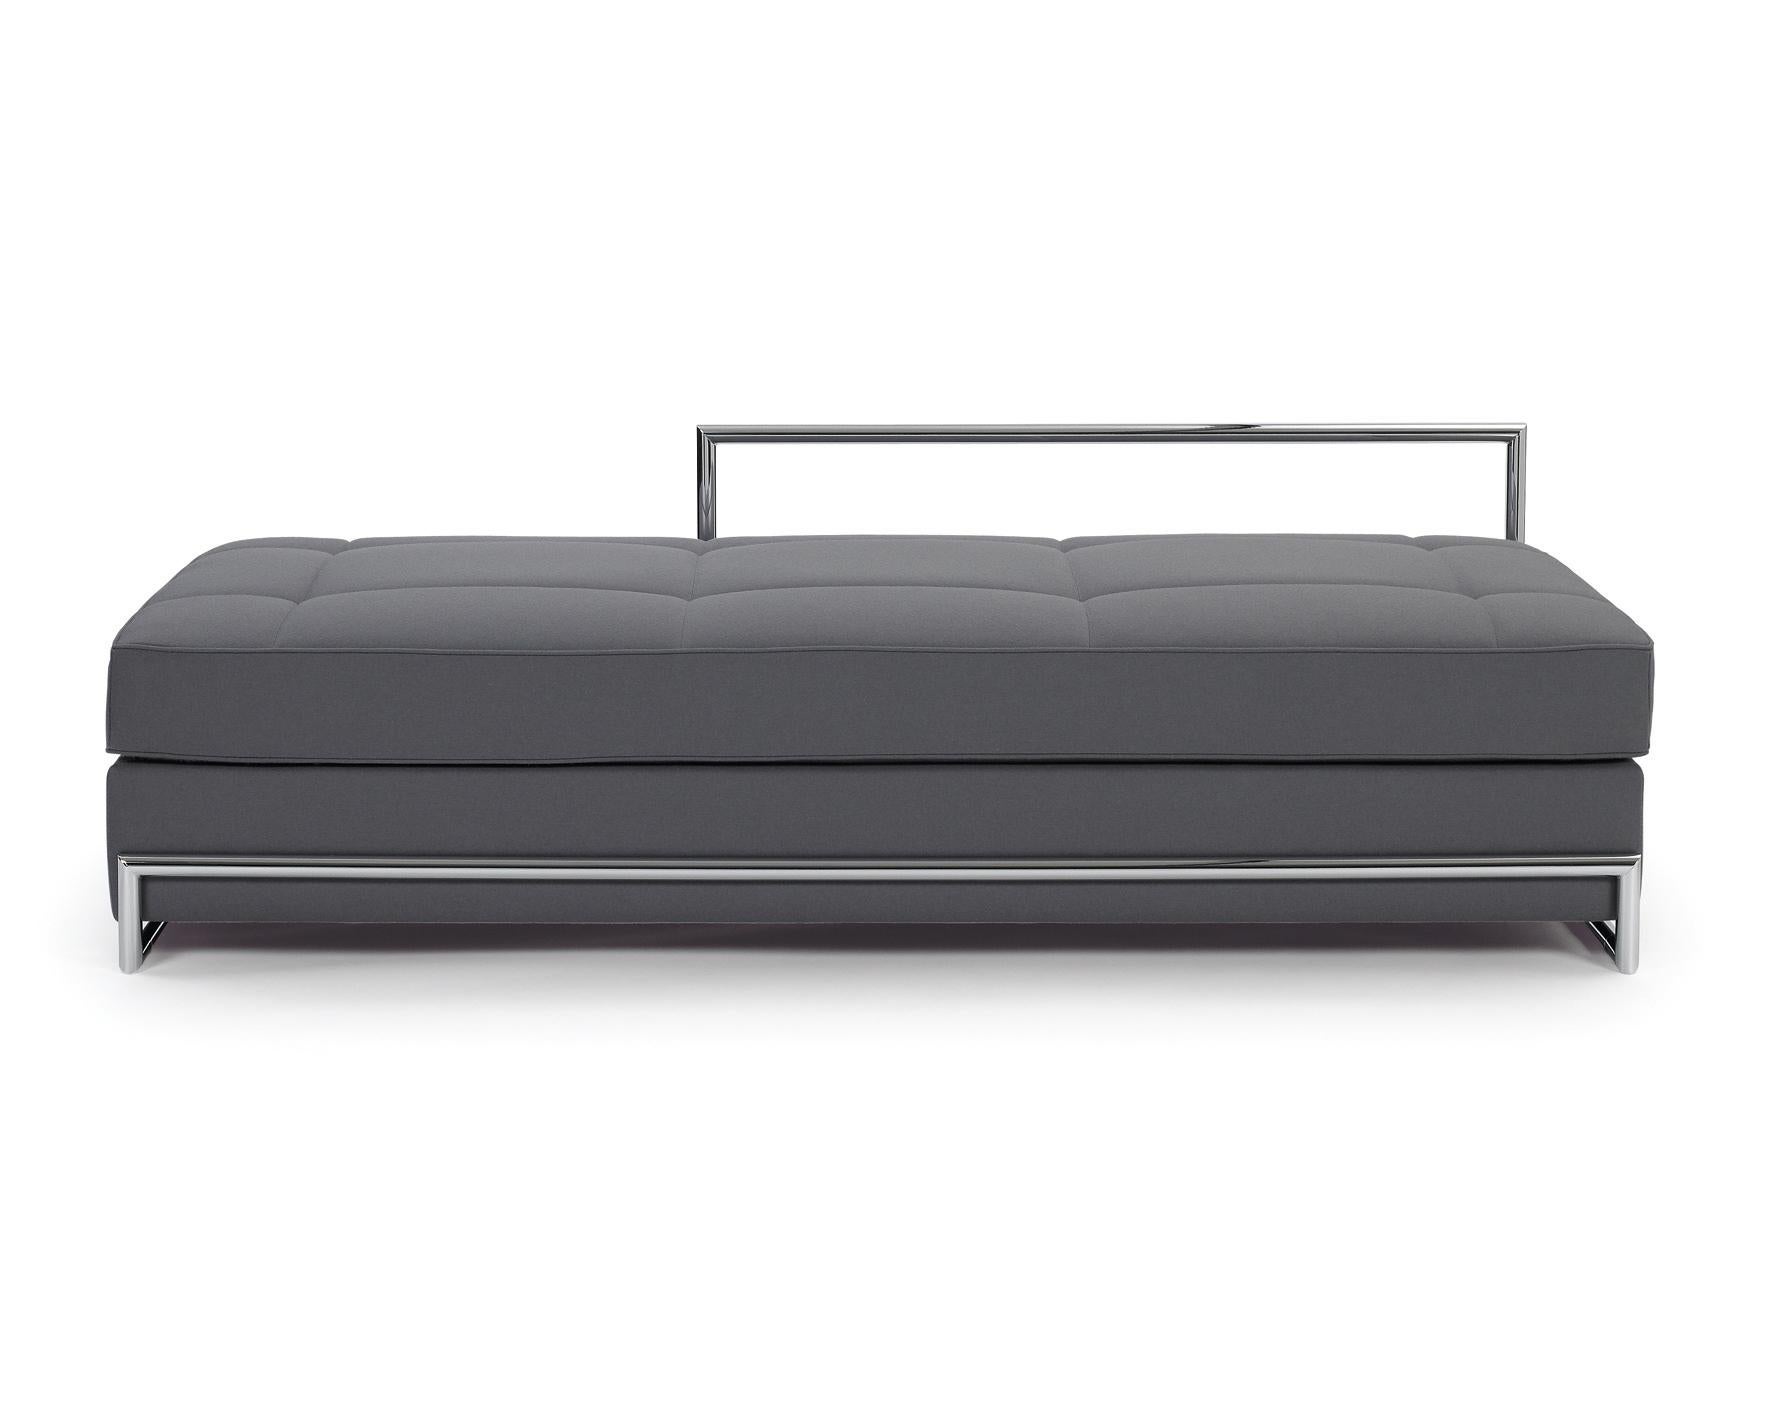 The daybed is rightly counted among Eileen Gray’s most famous designs. The lounge 